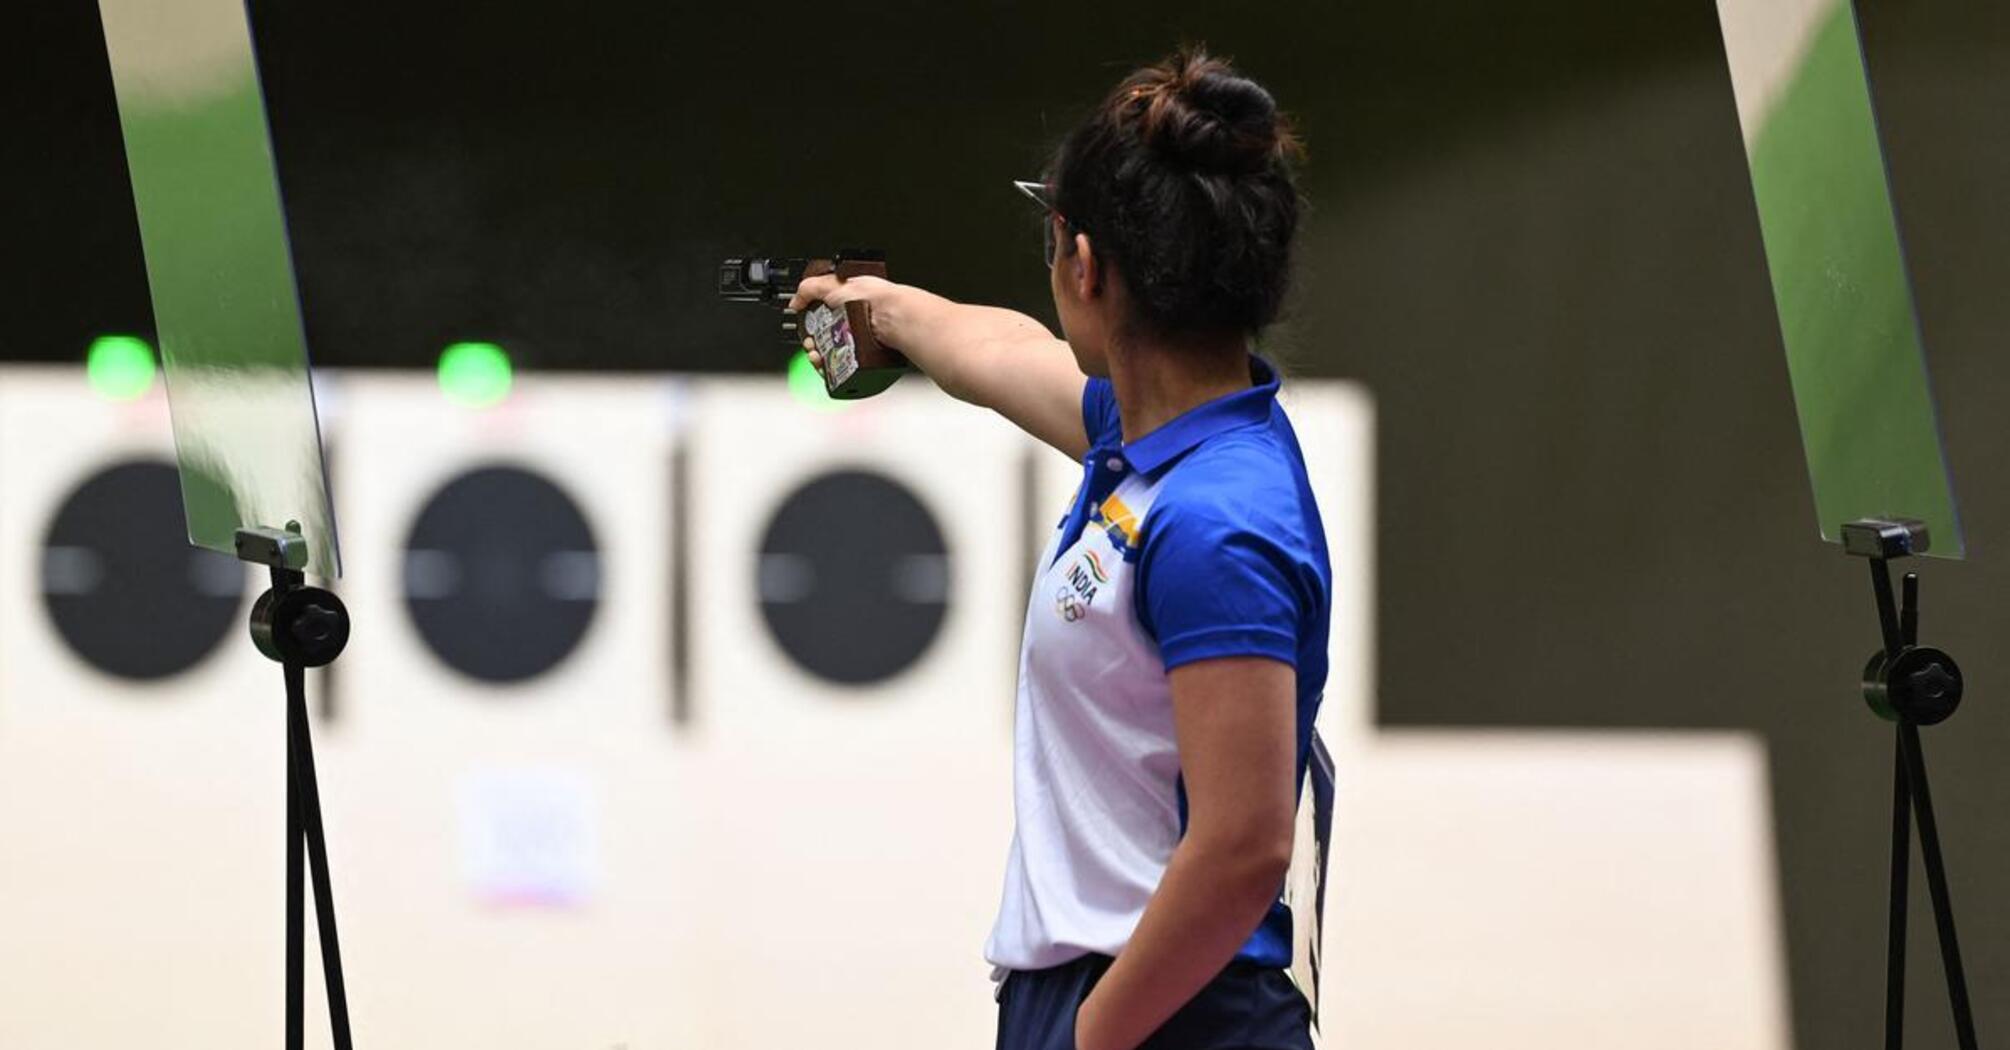 Ukraine wins the first gold medal in 10-meter air pistol shooting